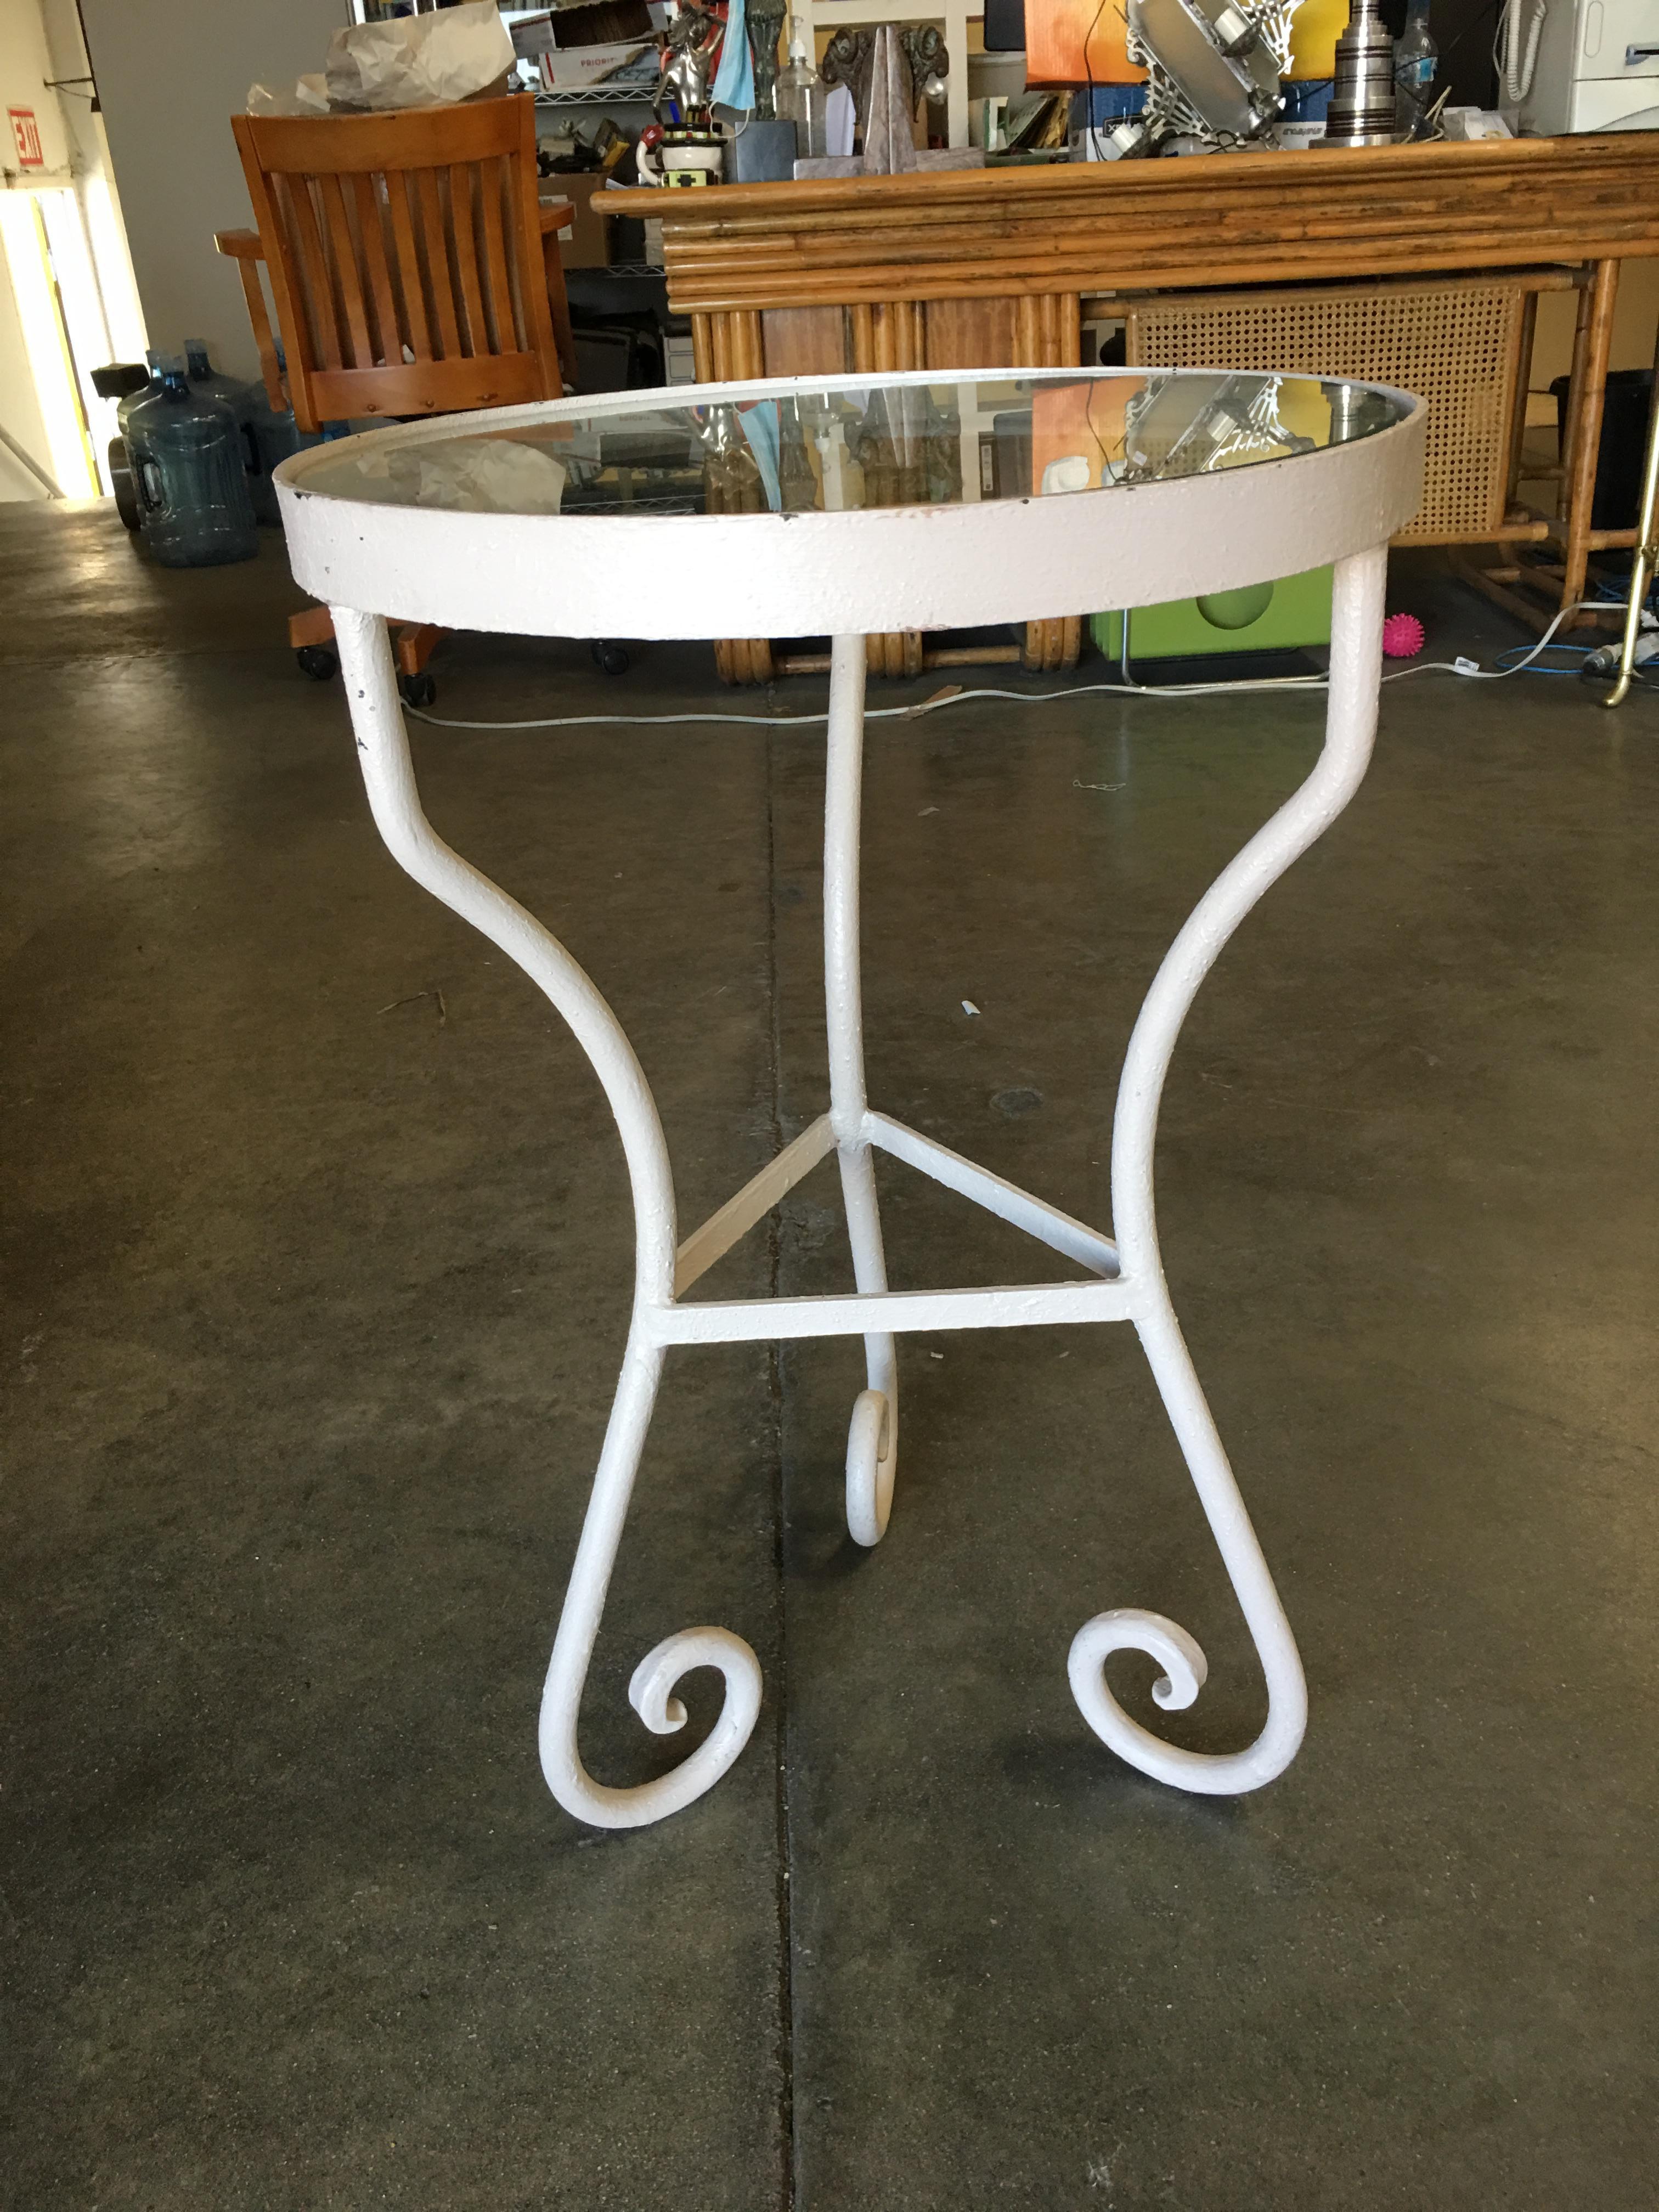 Vintage outdoor/patio side table with iron scrolling base and glass top by the Woodward company. The table can be repainted in your choice of black, teal or white.

Circa 1950, USA by Woodard.

